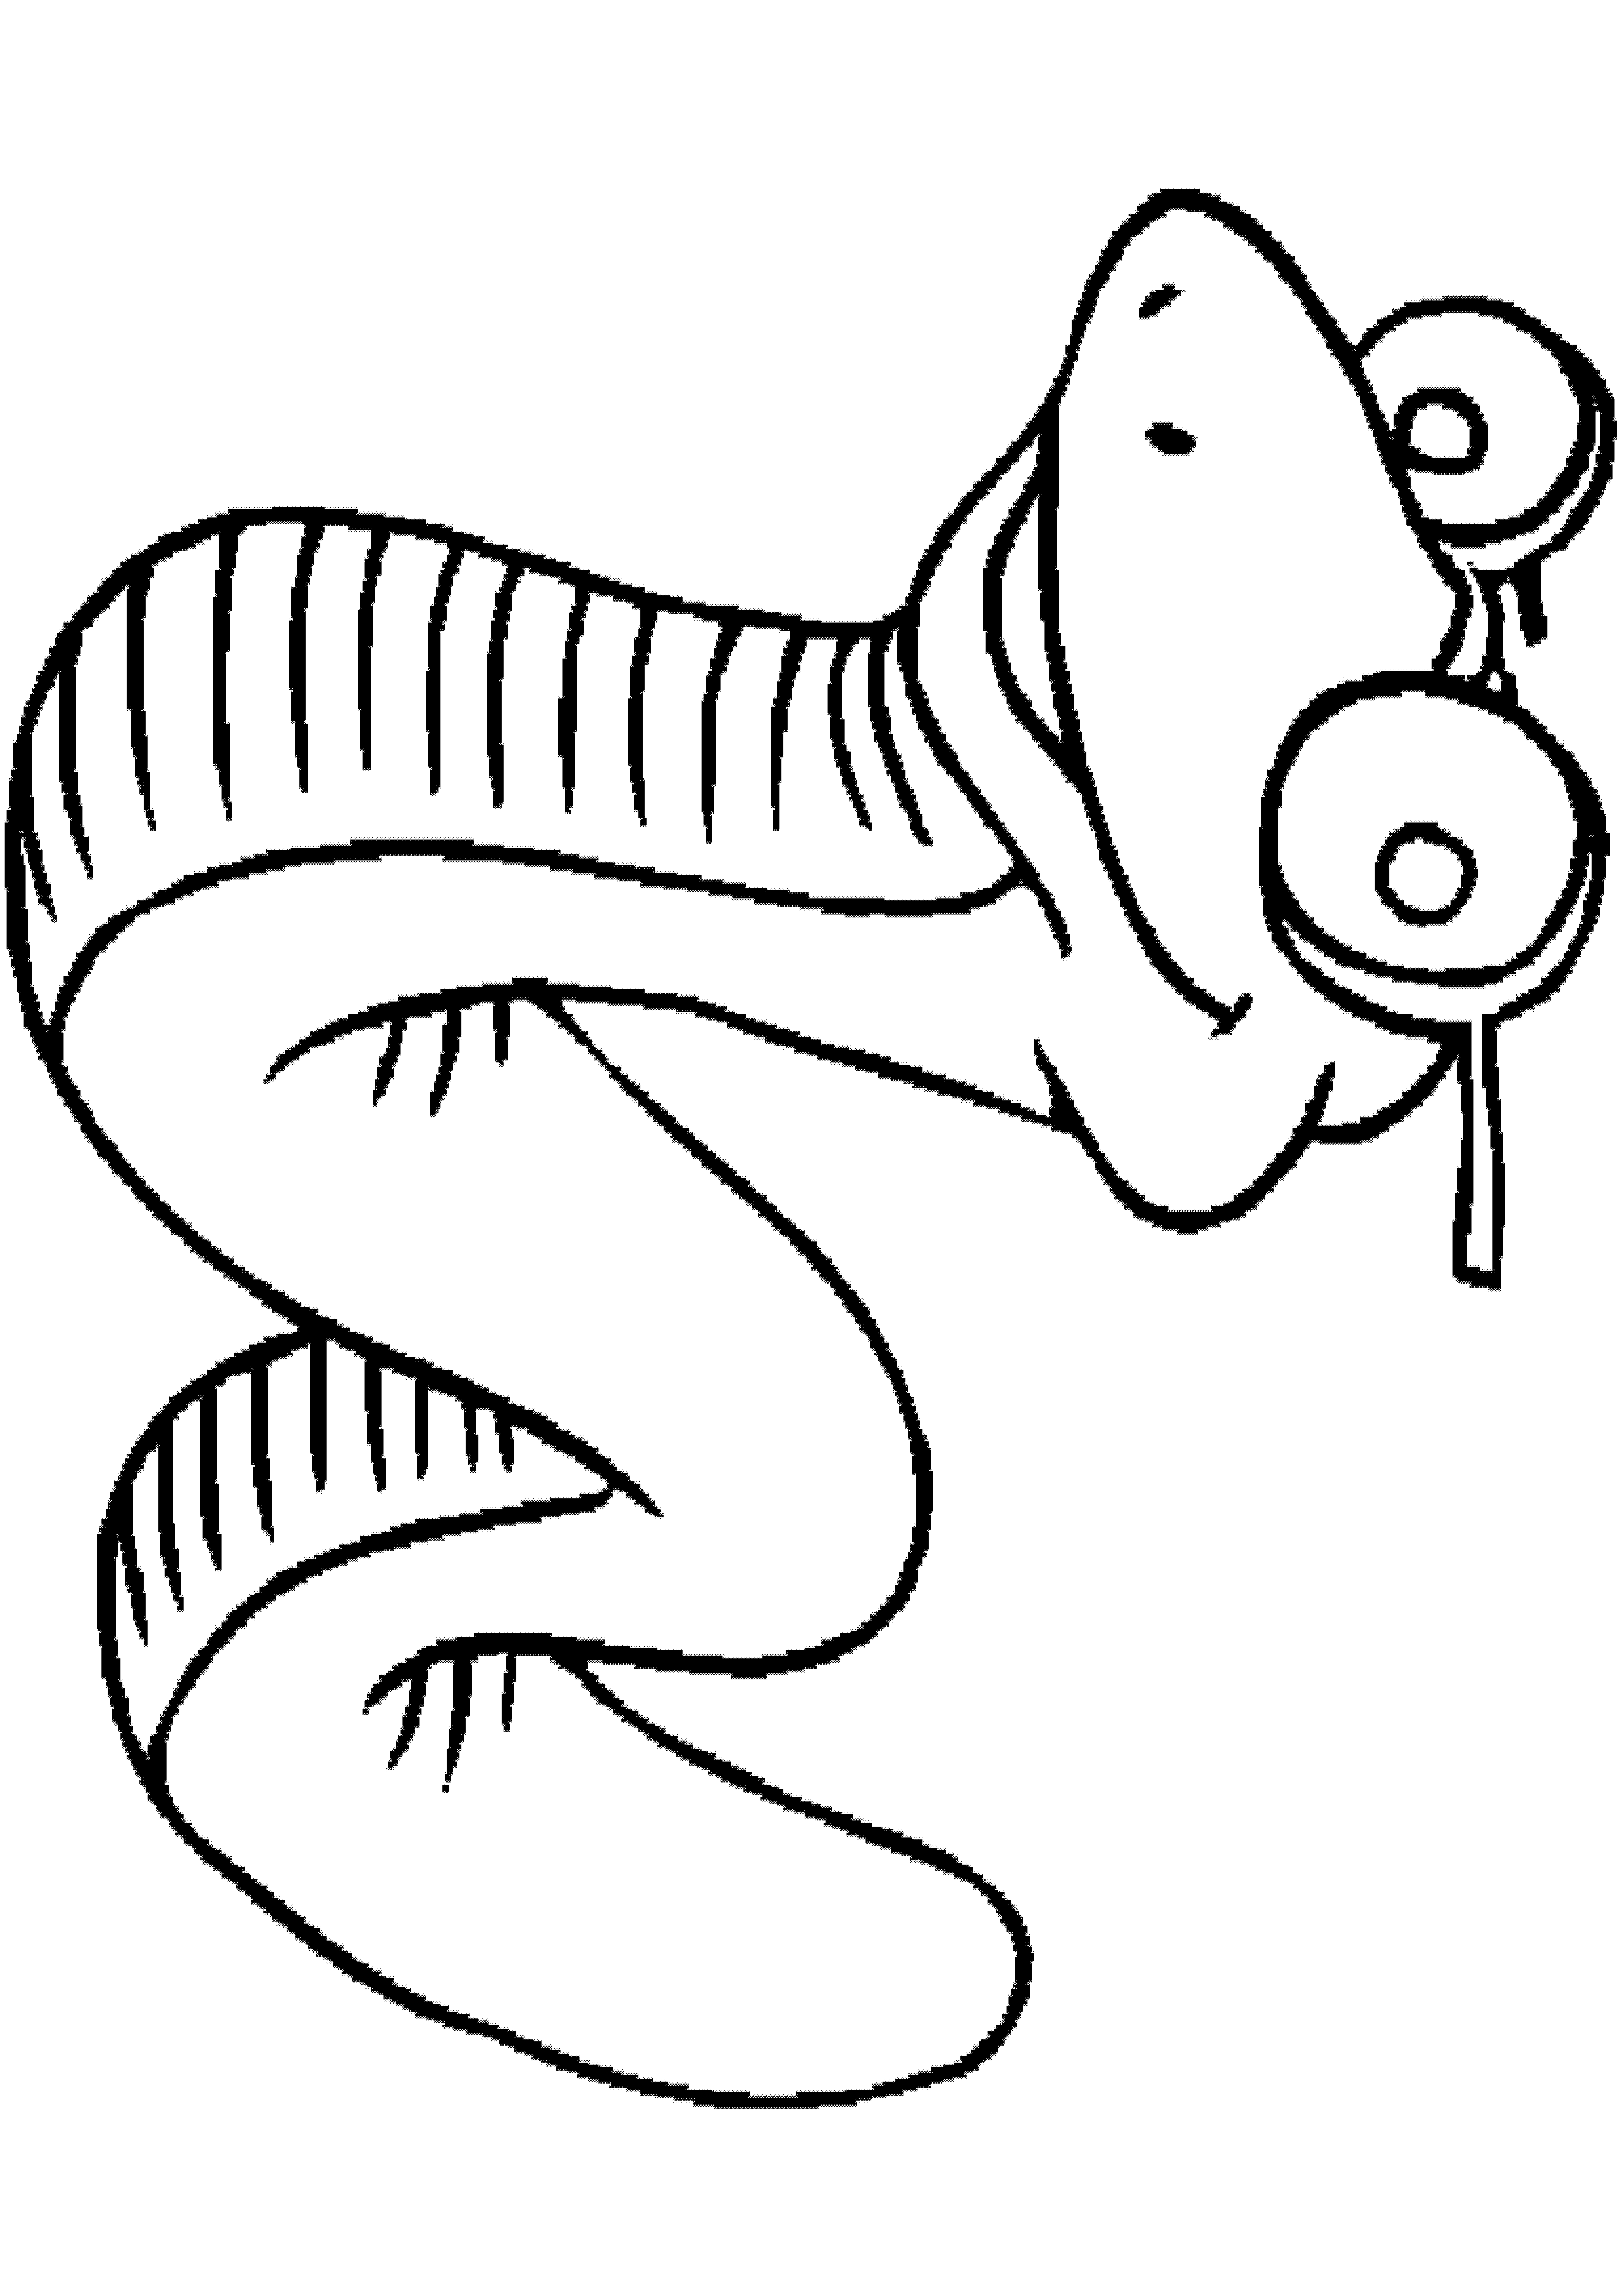 Snake Animal Coloring Pages | Print Colouring Pages